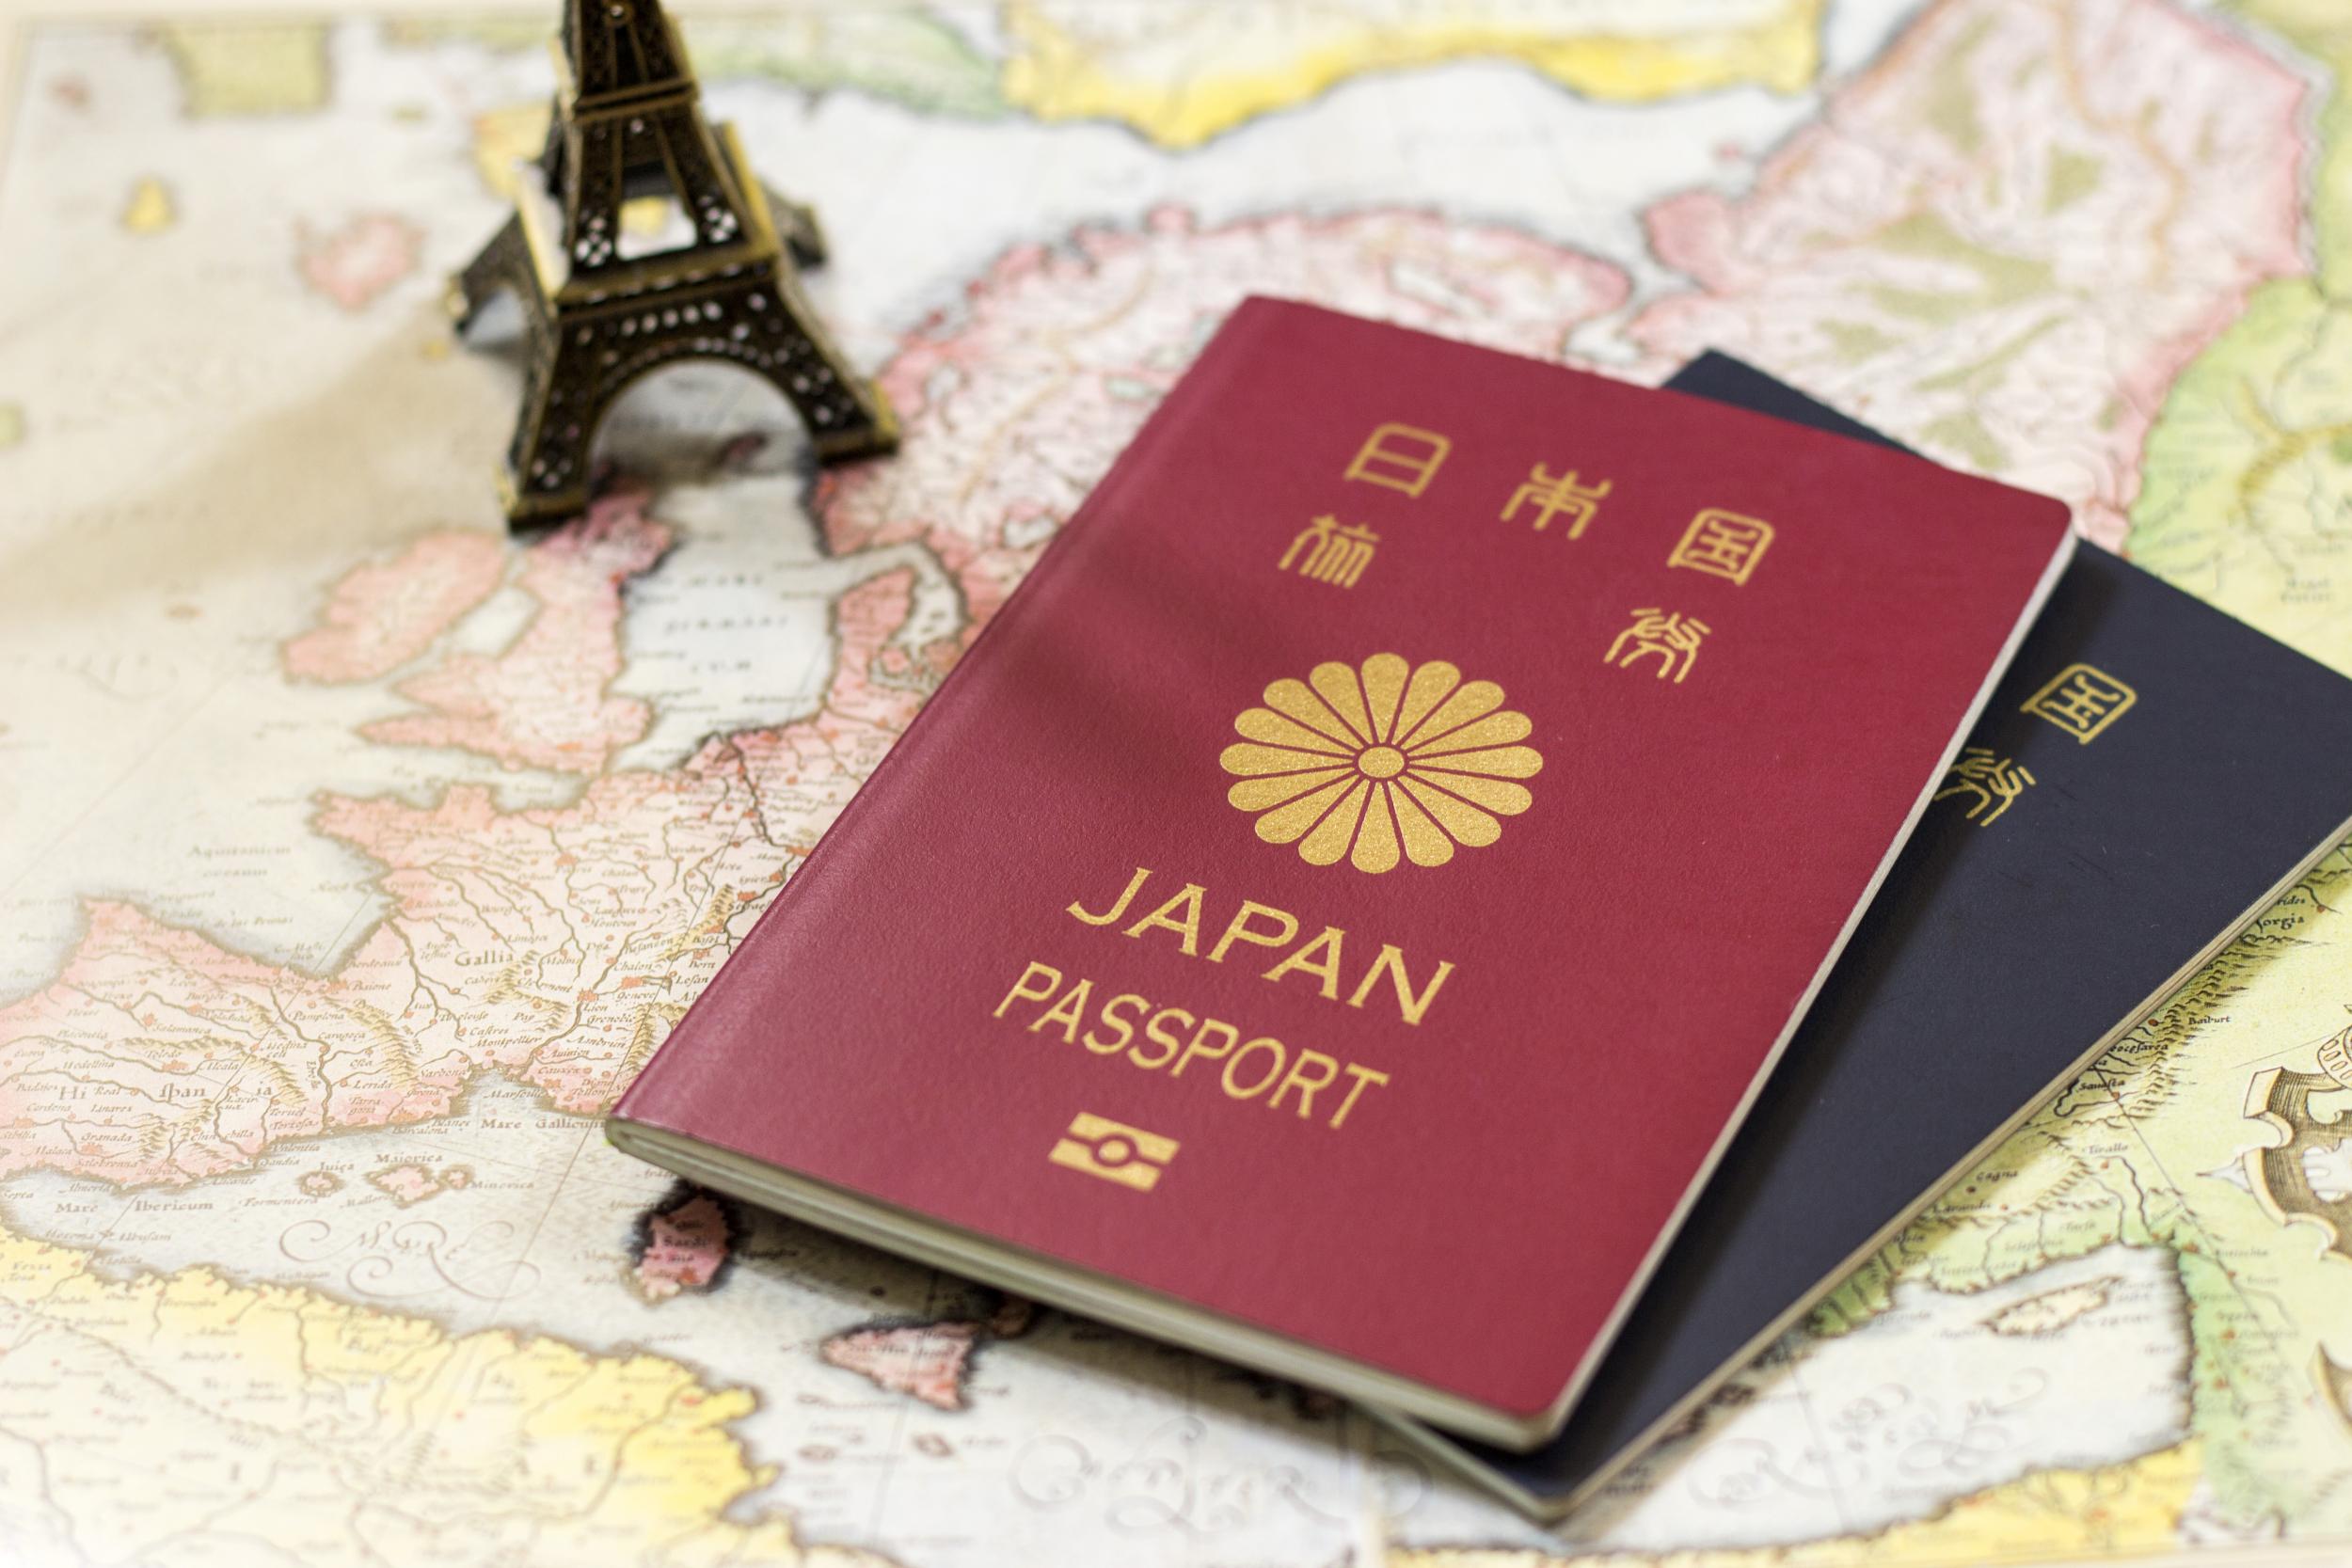 The Japanese passport is one of the strongest in the world, according to Henley & Partners